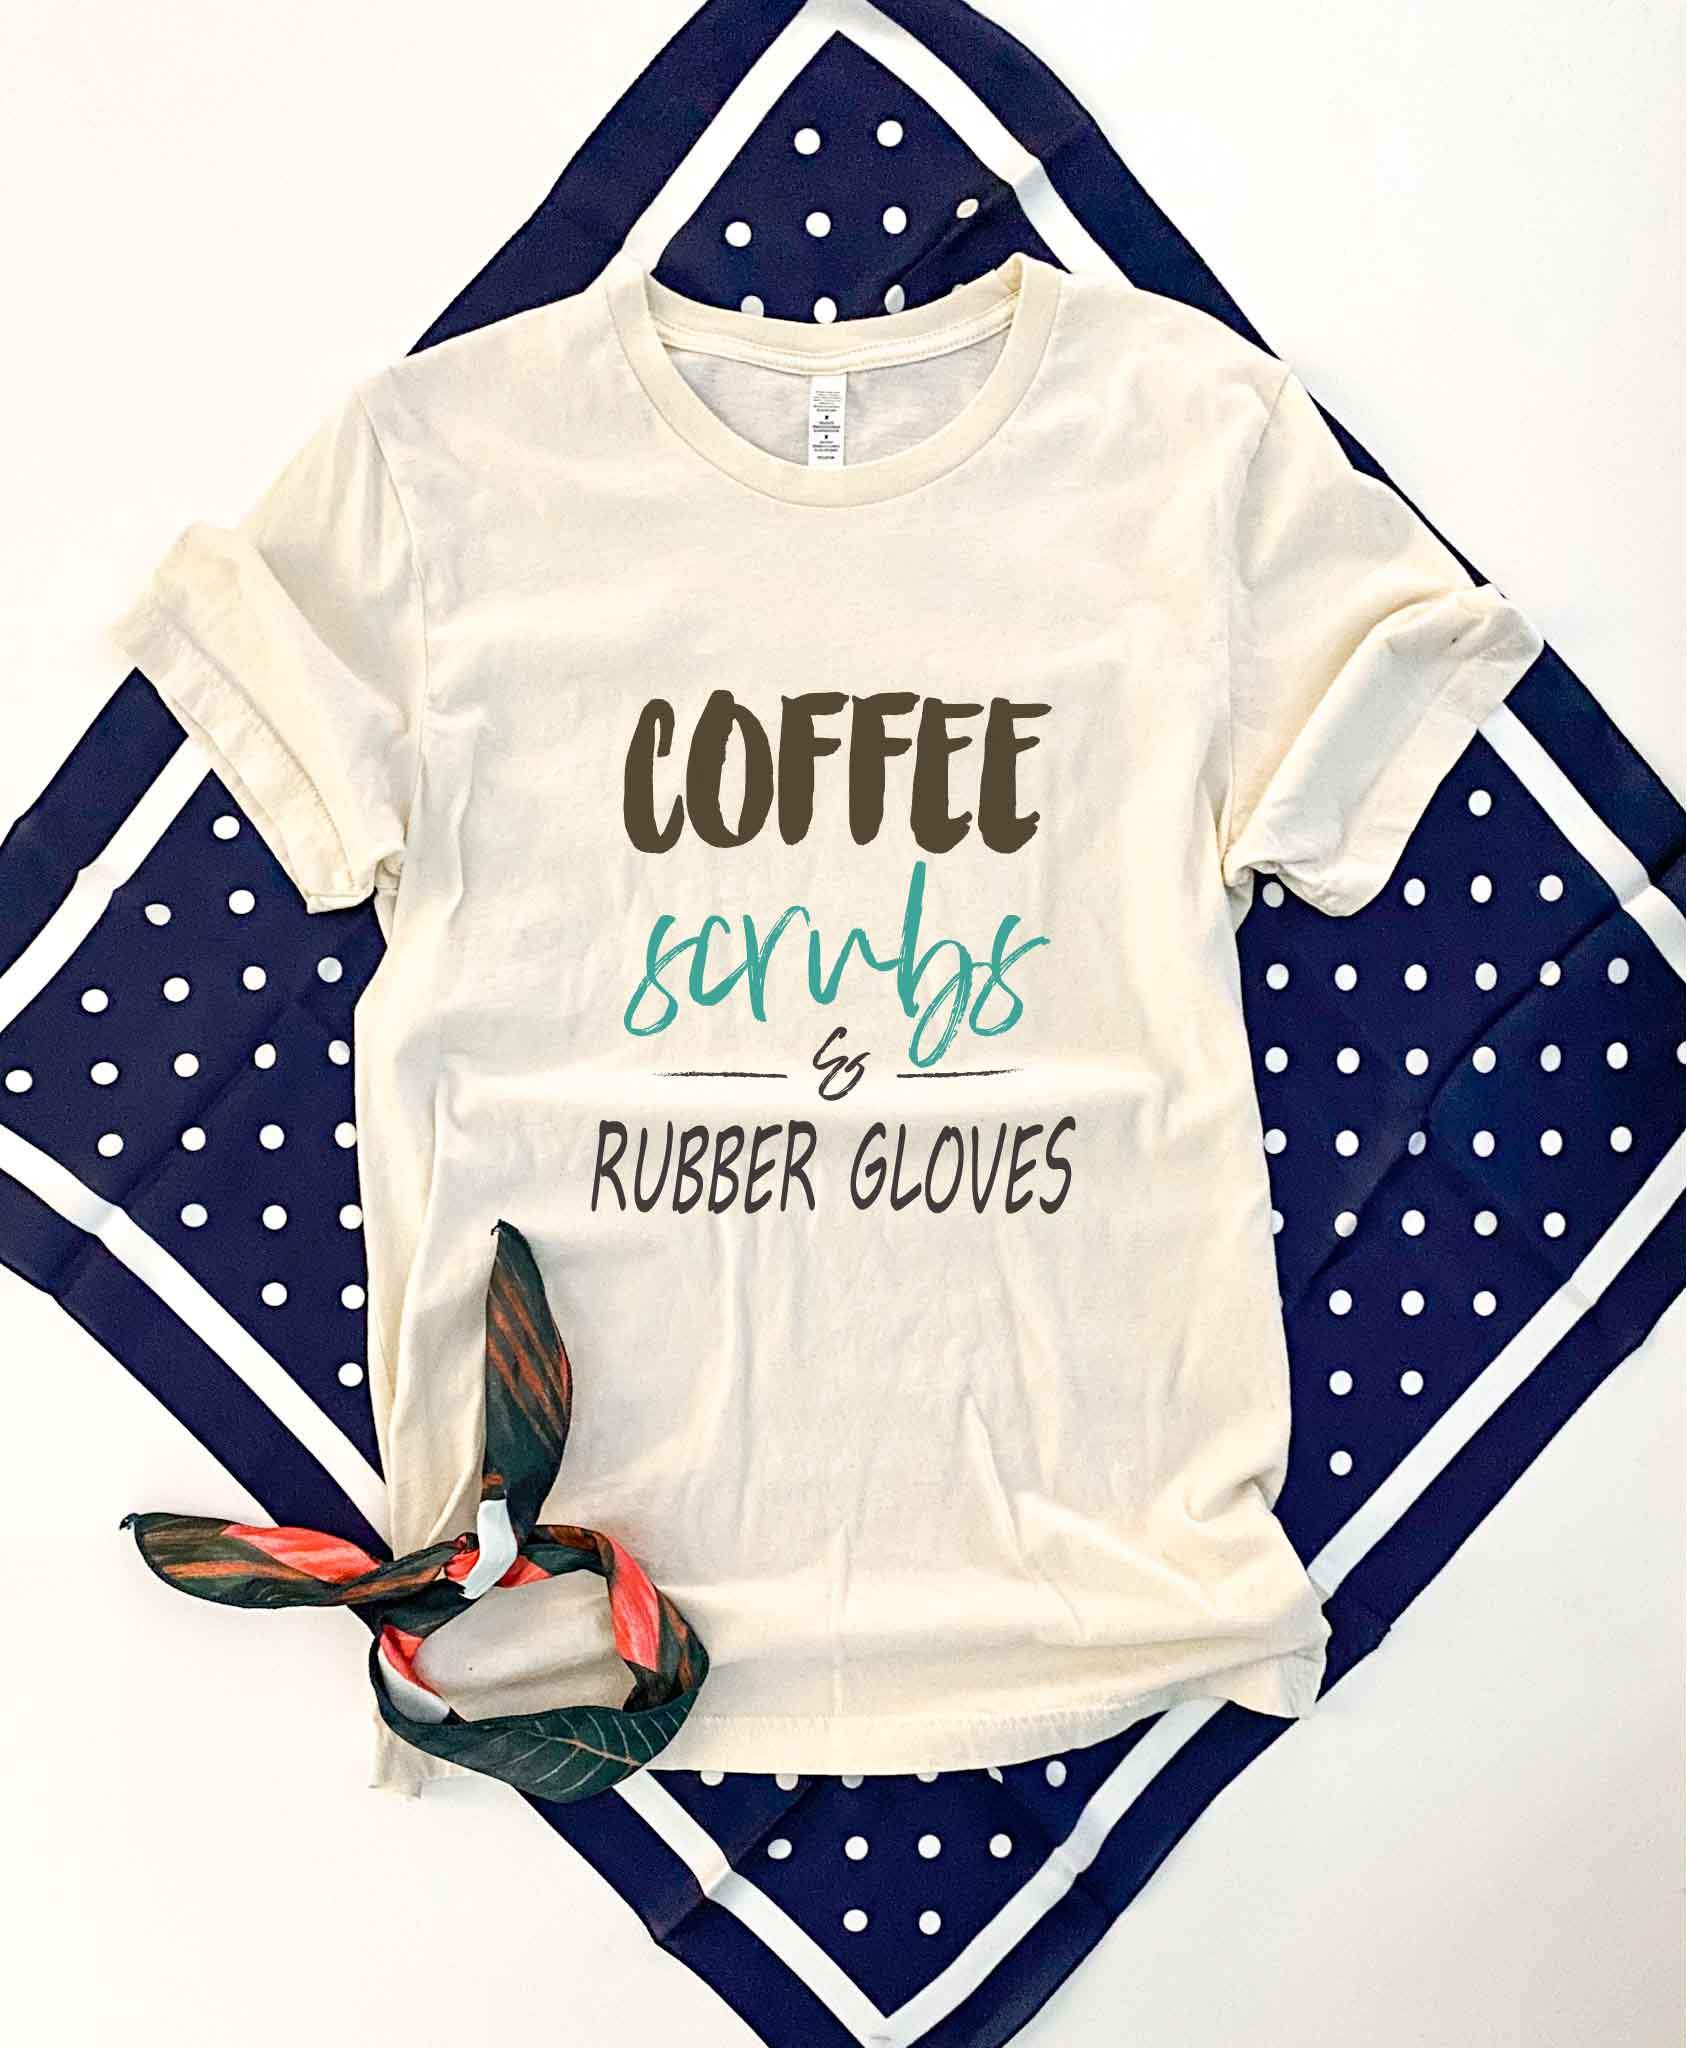 Coffee scrubs and rubber gloves tee Short sleeve healthcare tee Bella Canvas 3001 